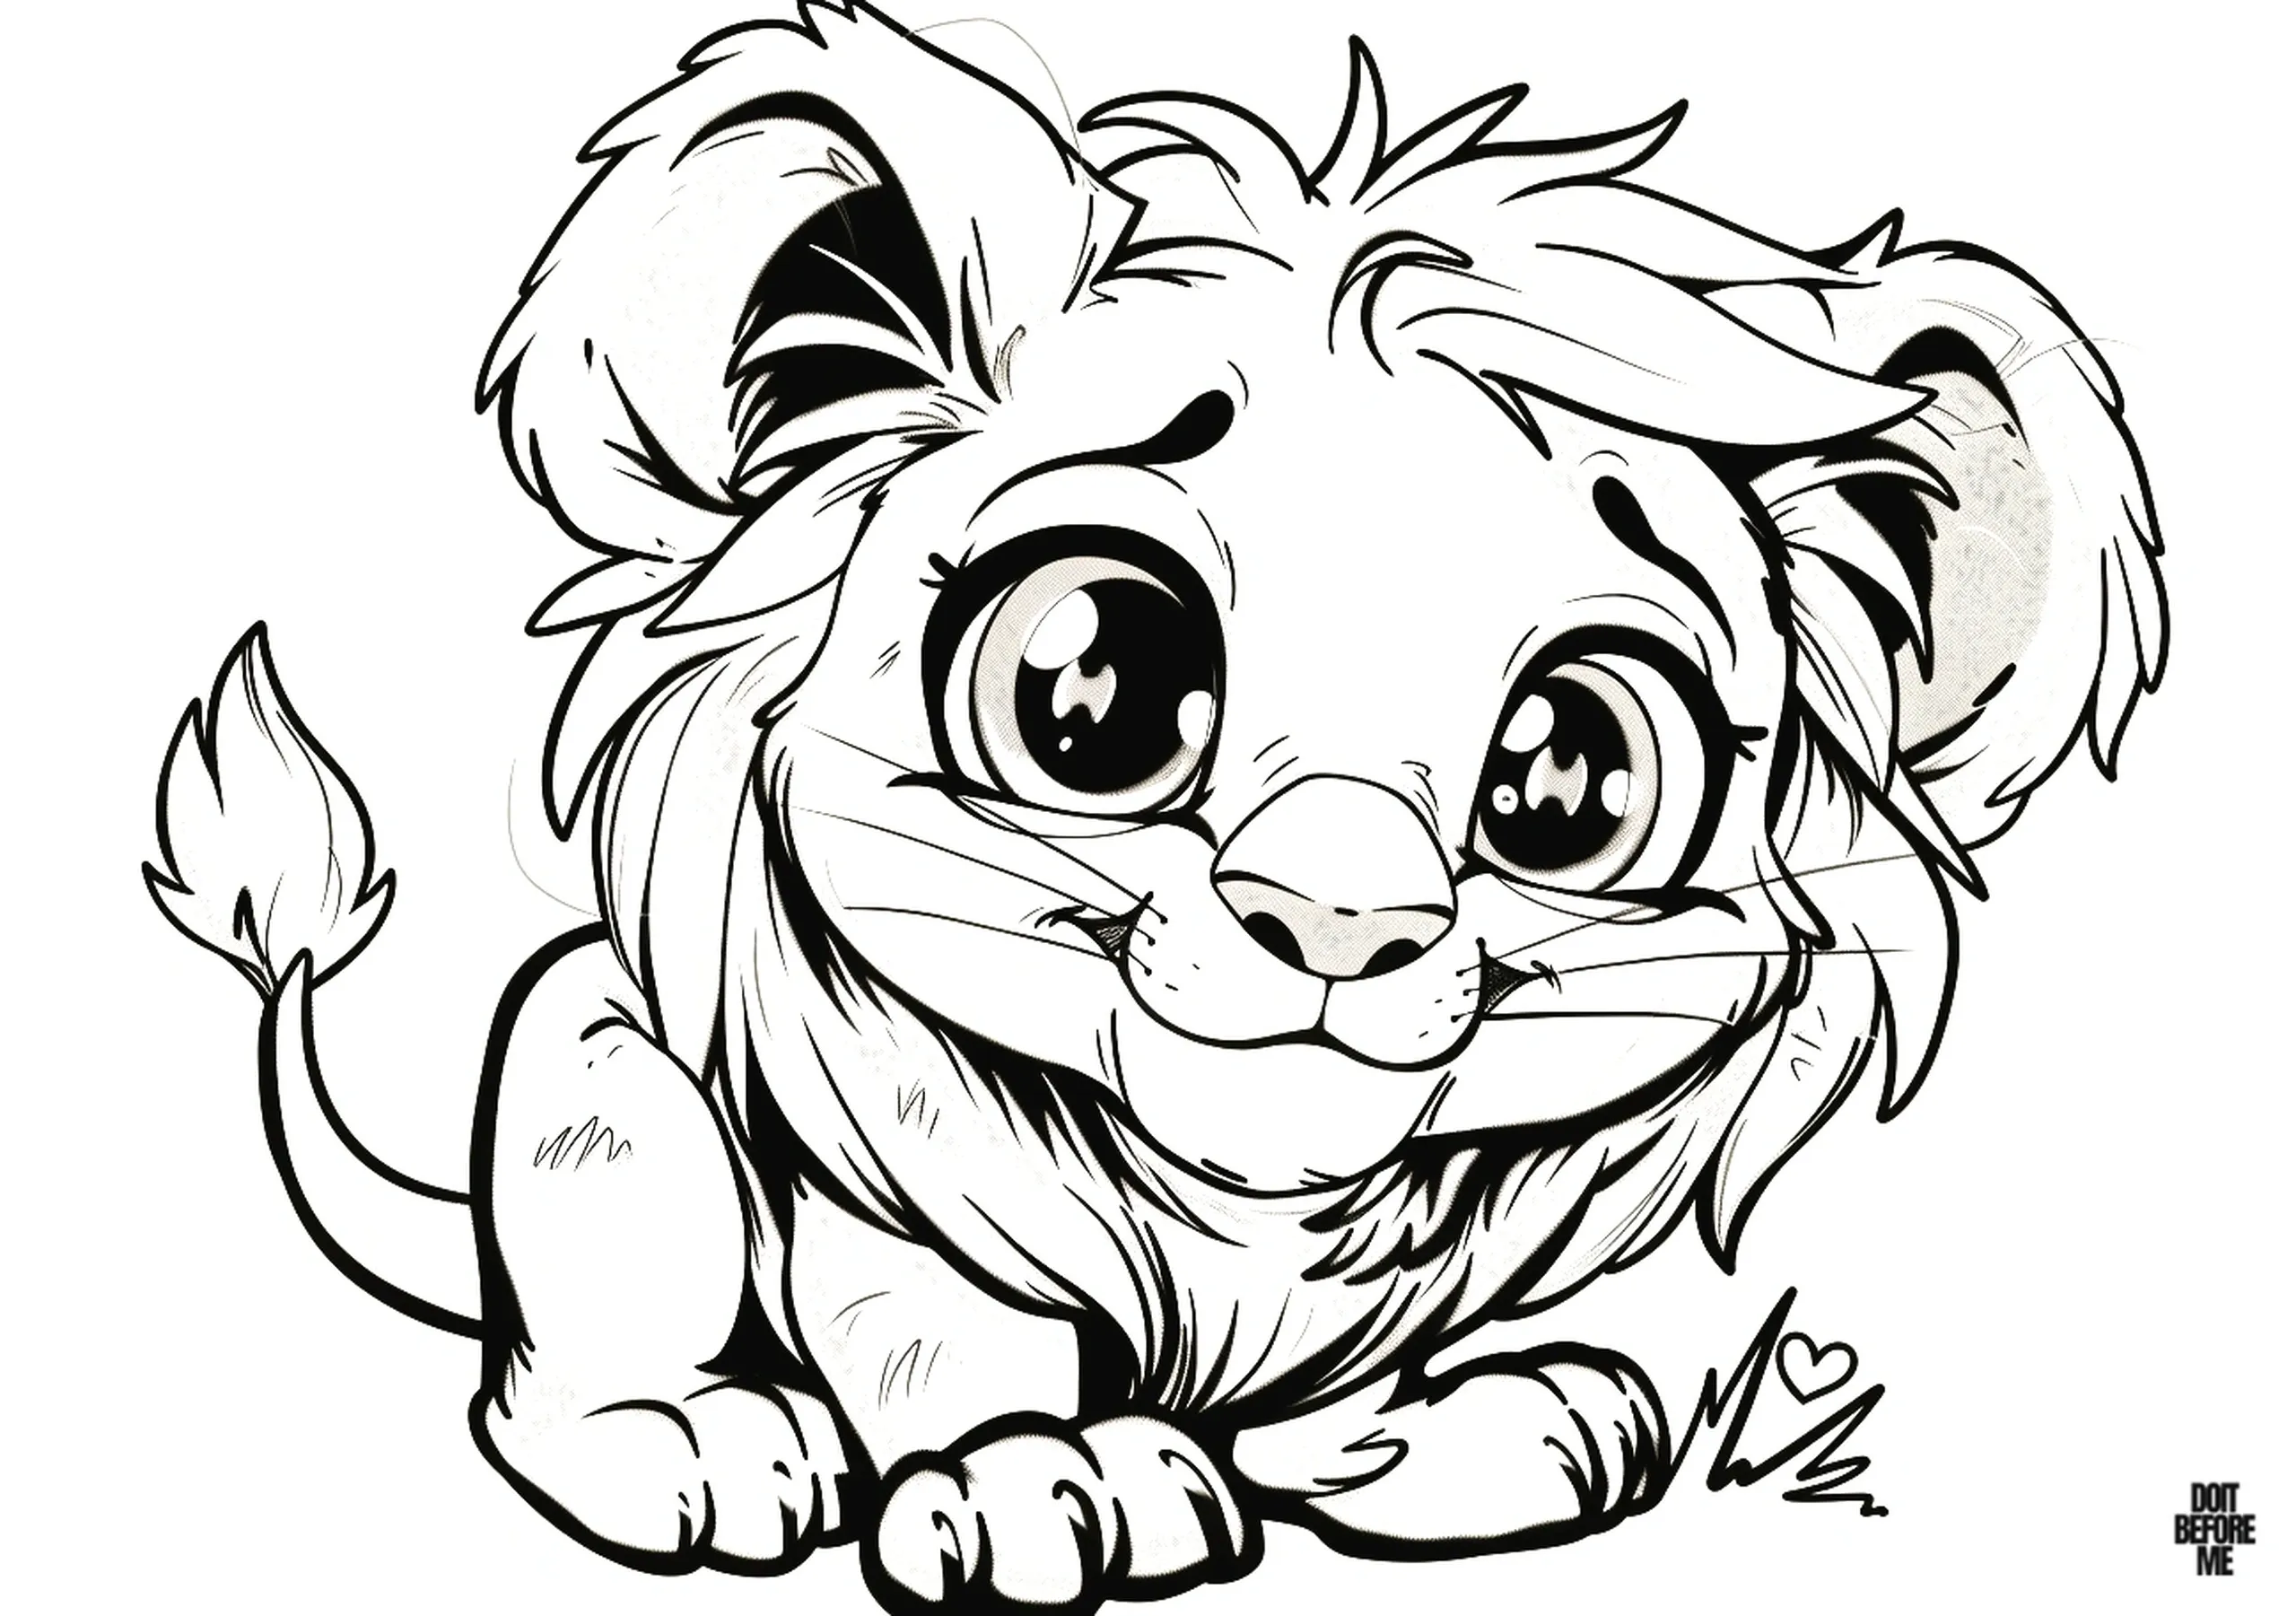 Tiny baby lion cub coloring picture, with its extremely cute facial expression, features a relatively detailed design, making it suitable for coloring by both adults and kids.